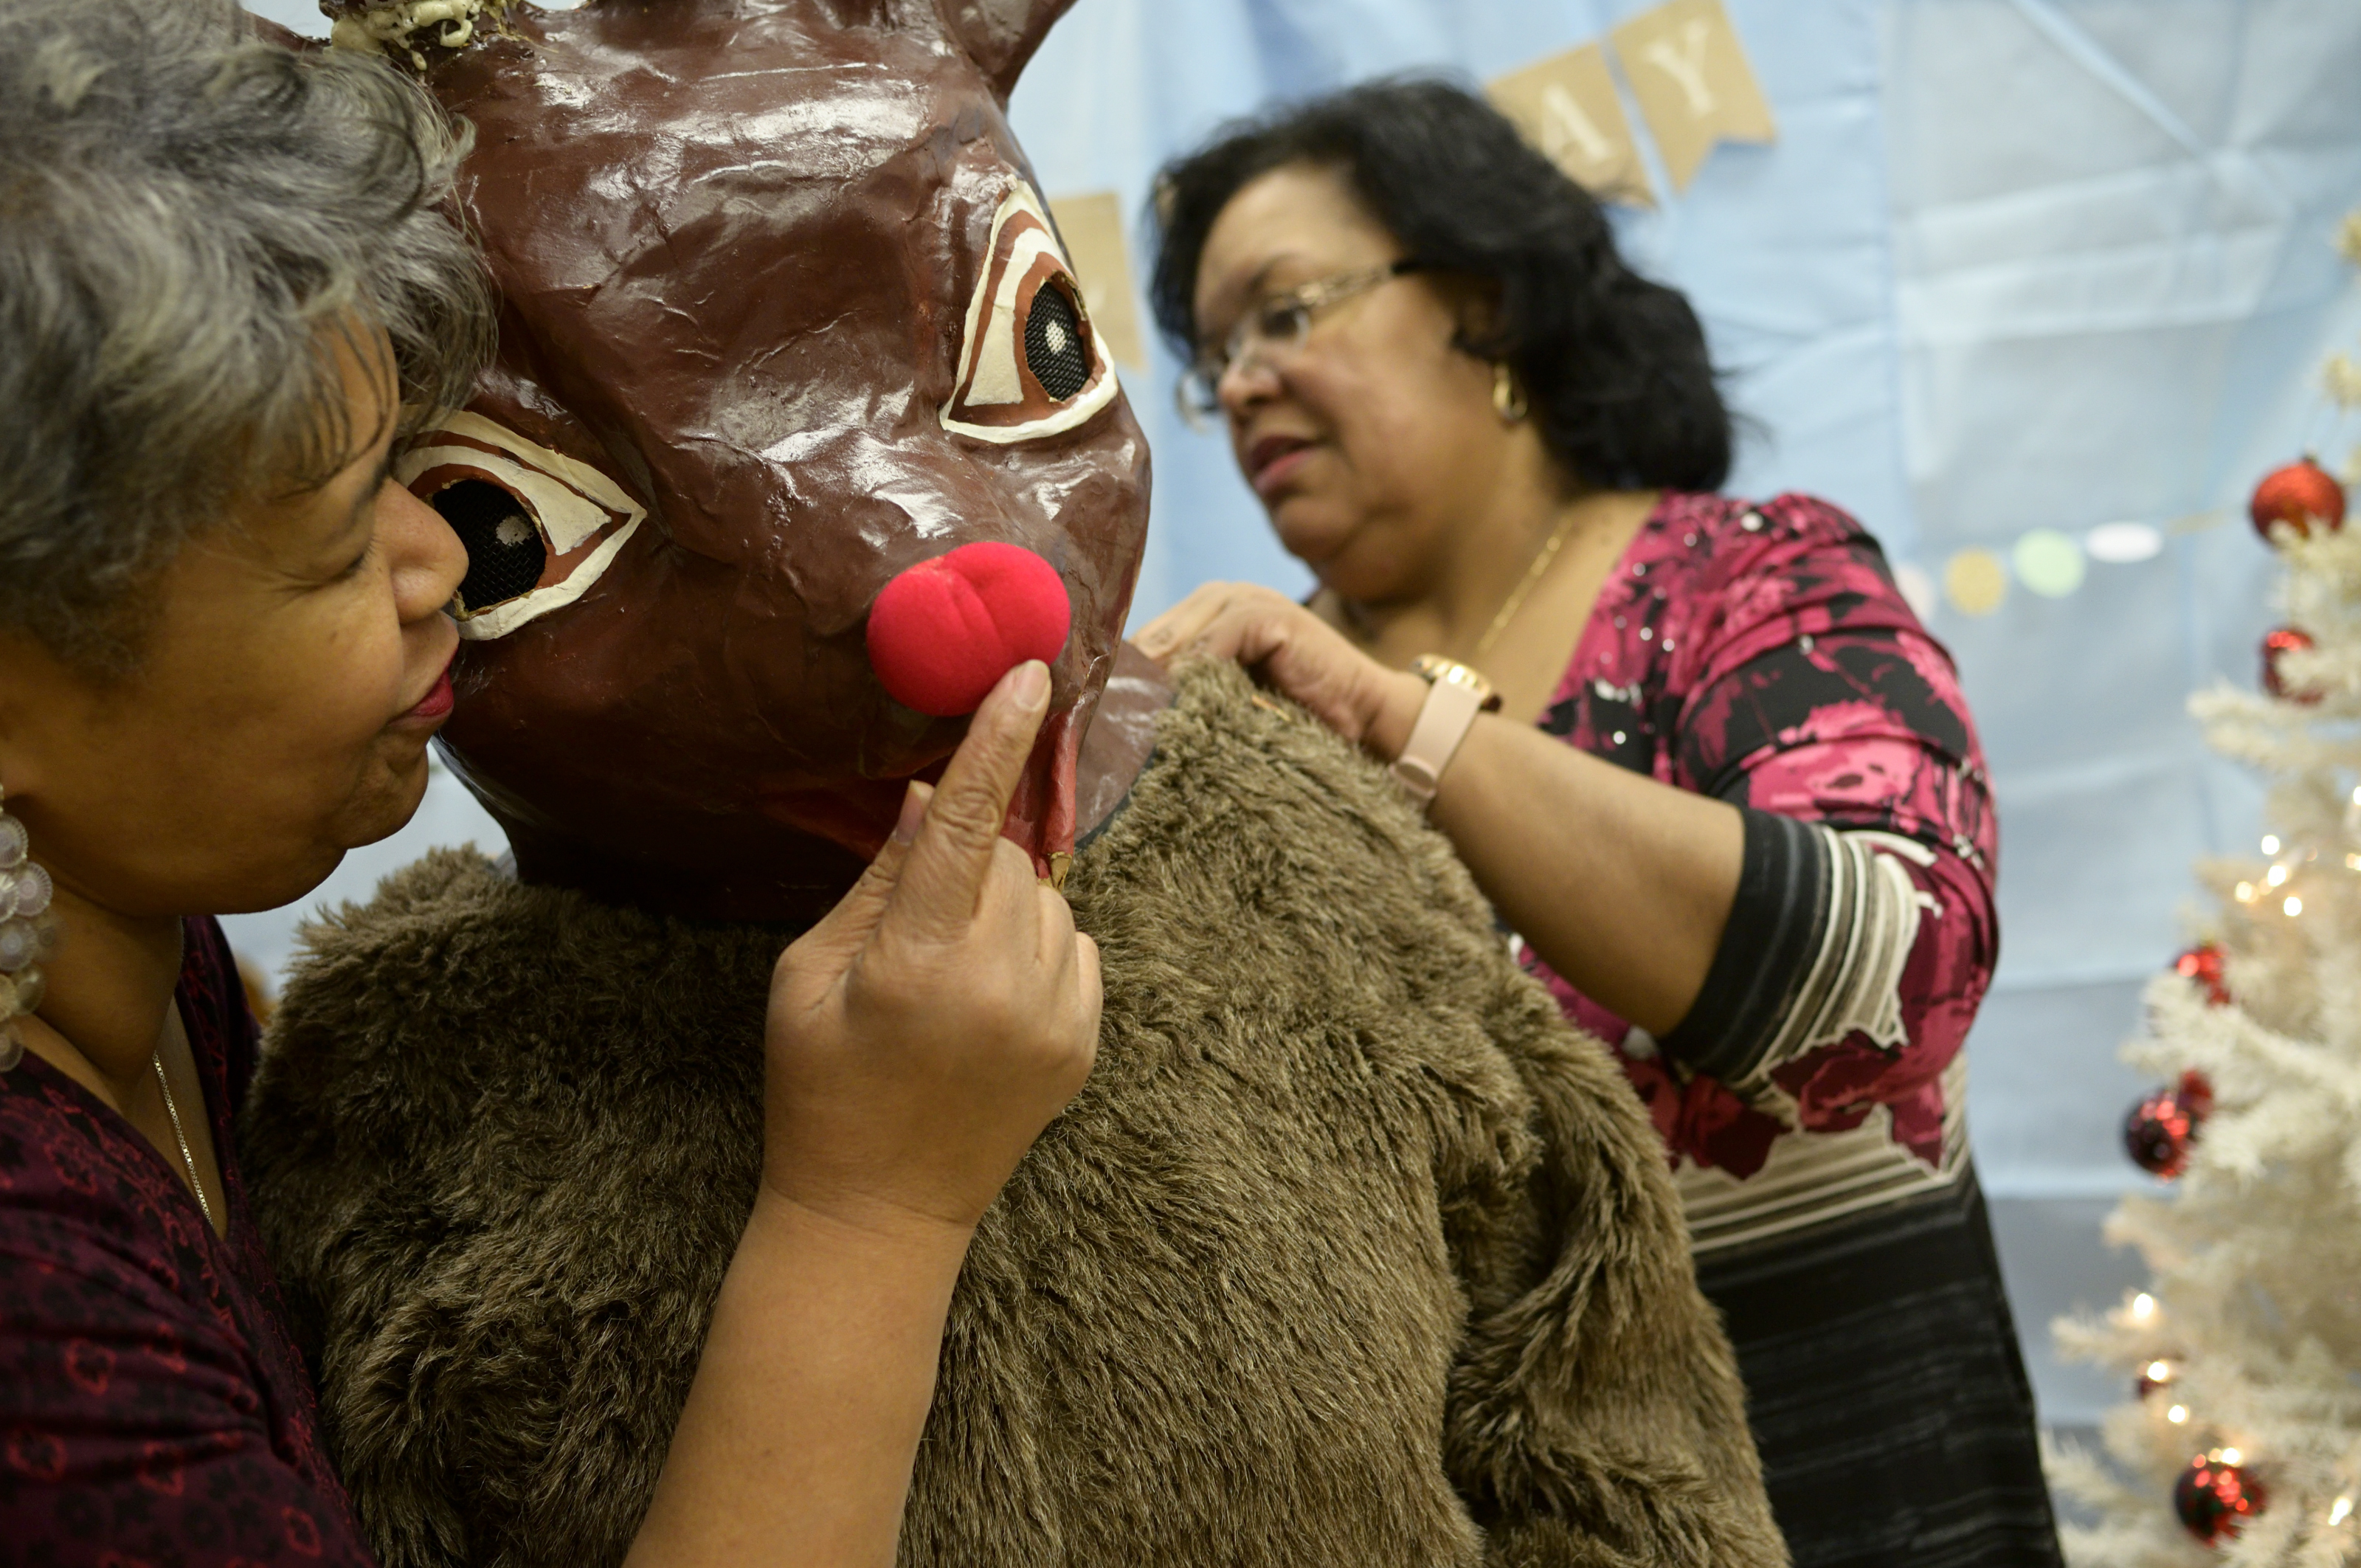 Staff members from Councilwoman Parker's office help prep Rudolph for the Annual Winter Festival in Olney. Bas Slabbers/WHYY.